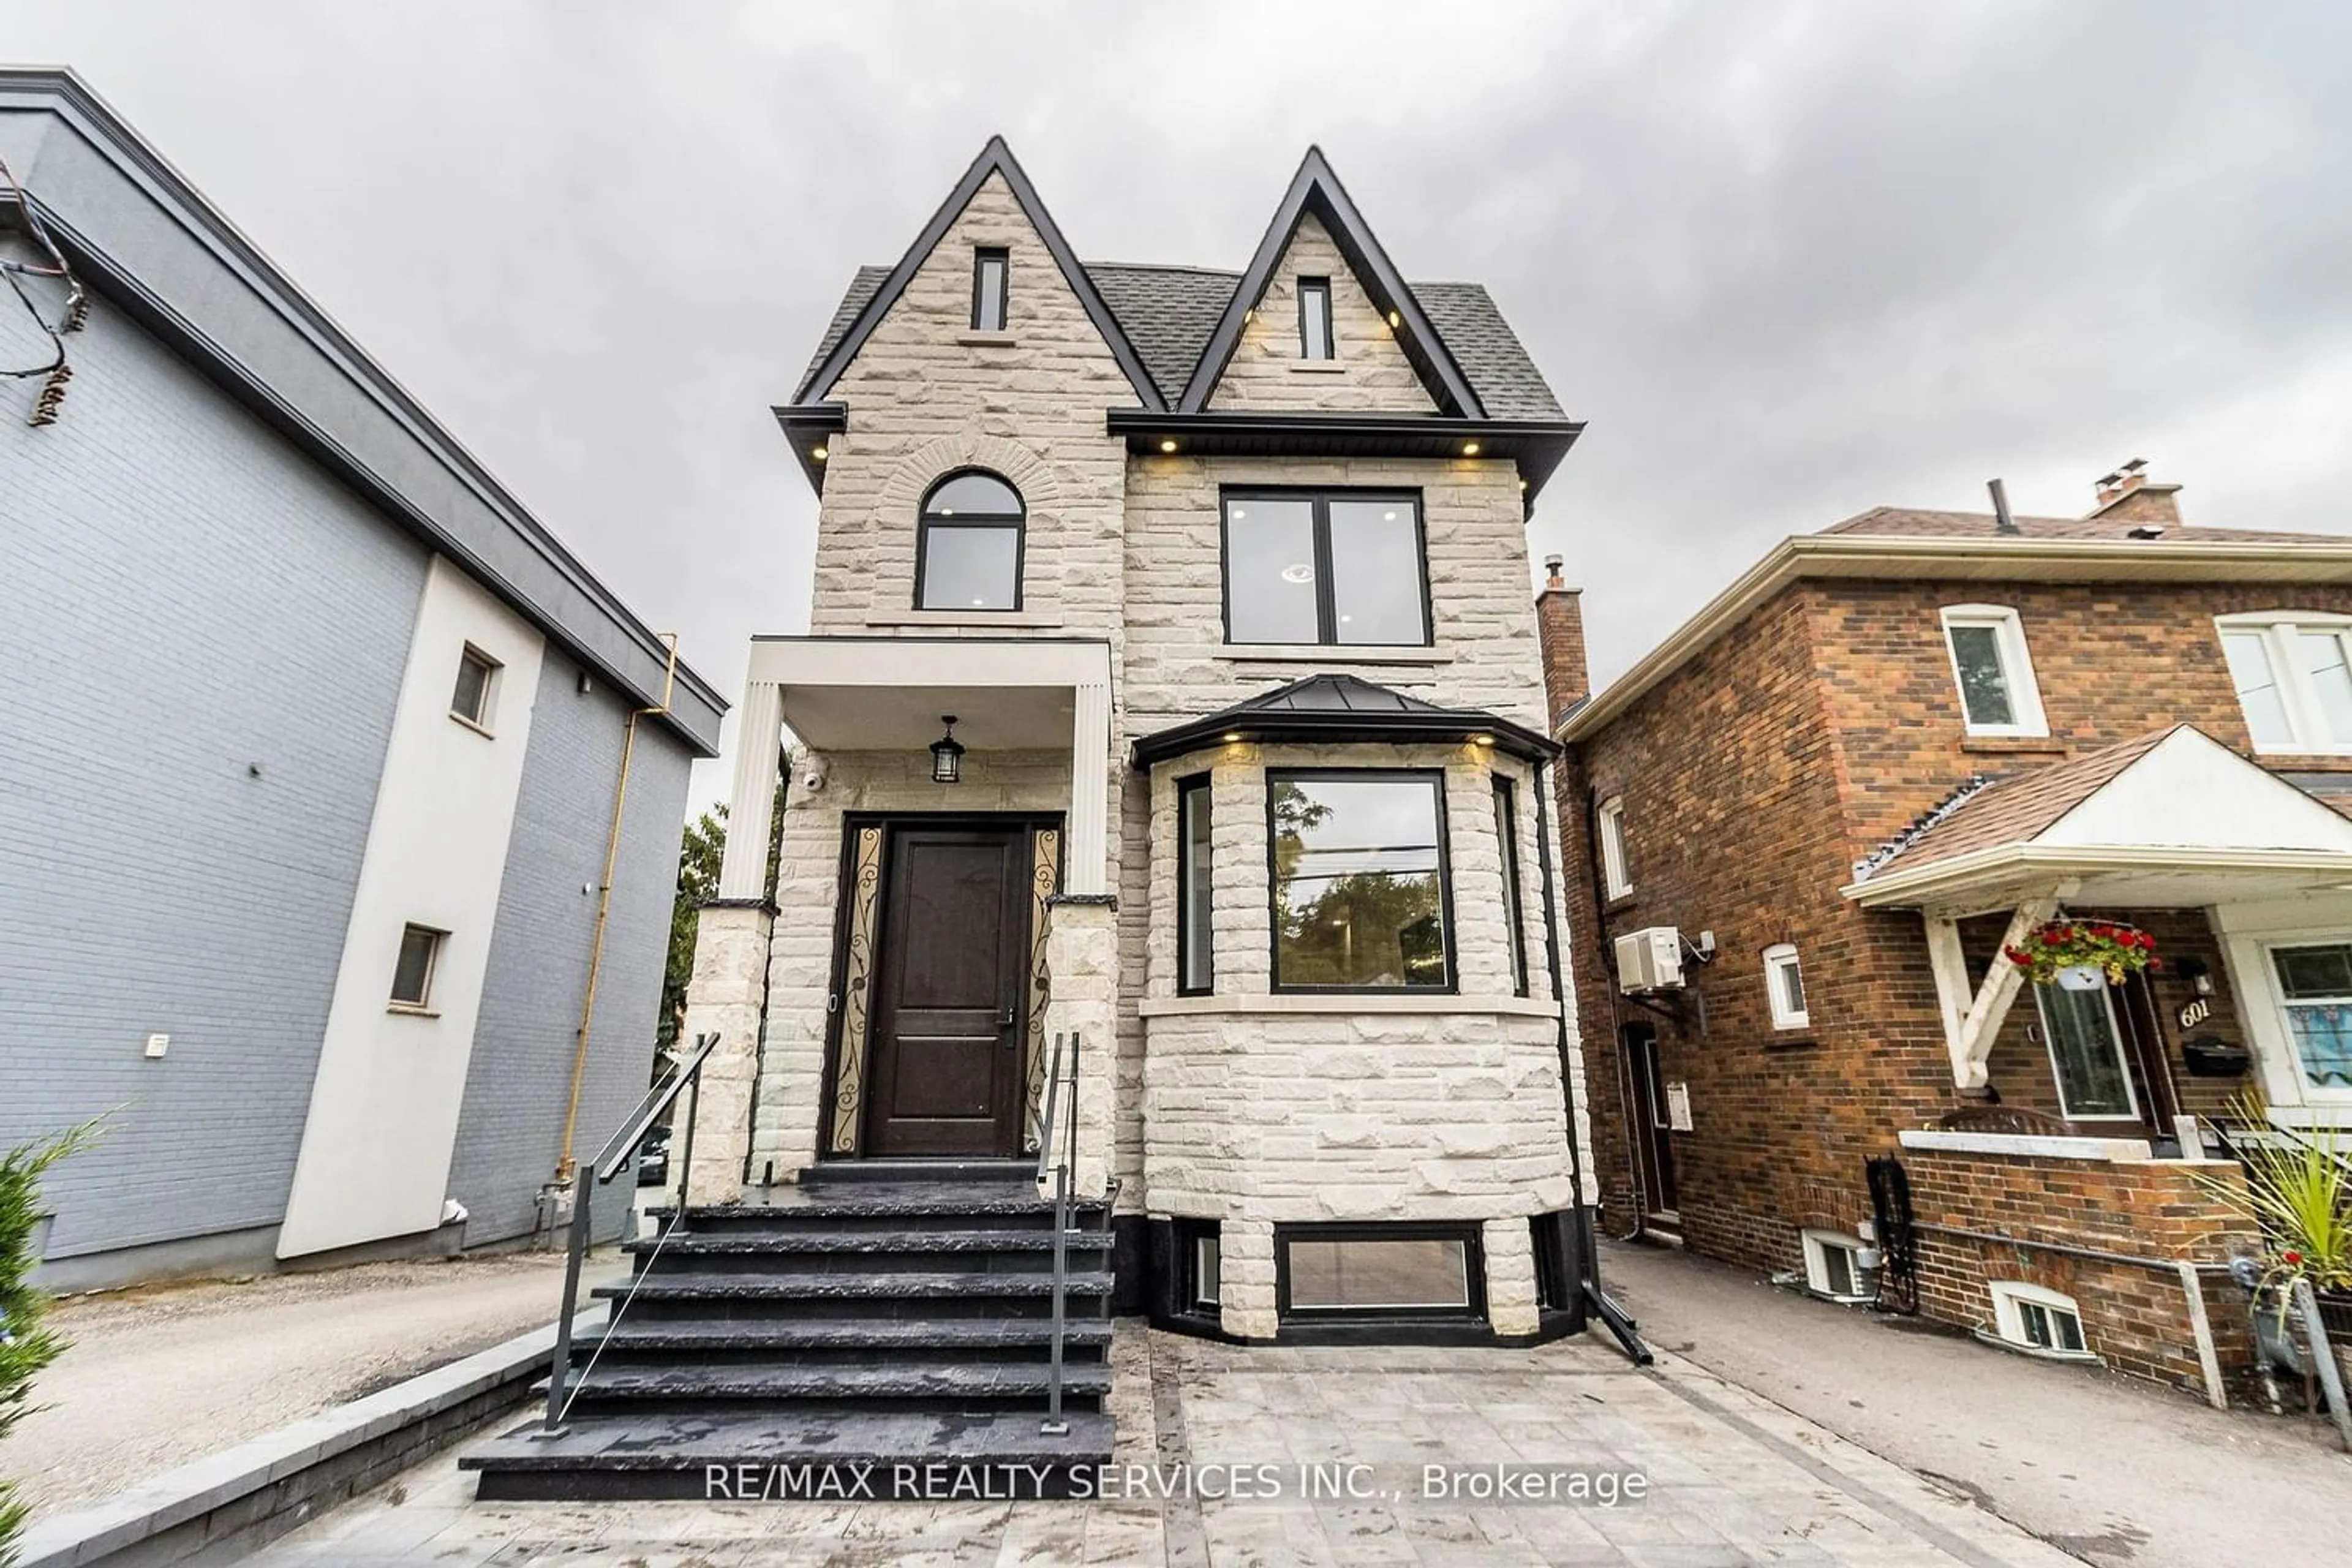 Home with brick exterior material for 603 Royal York Rd, Toronto Ontario M8Y 2S8